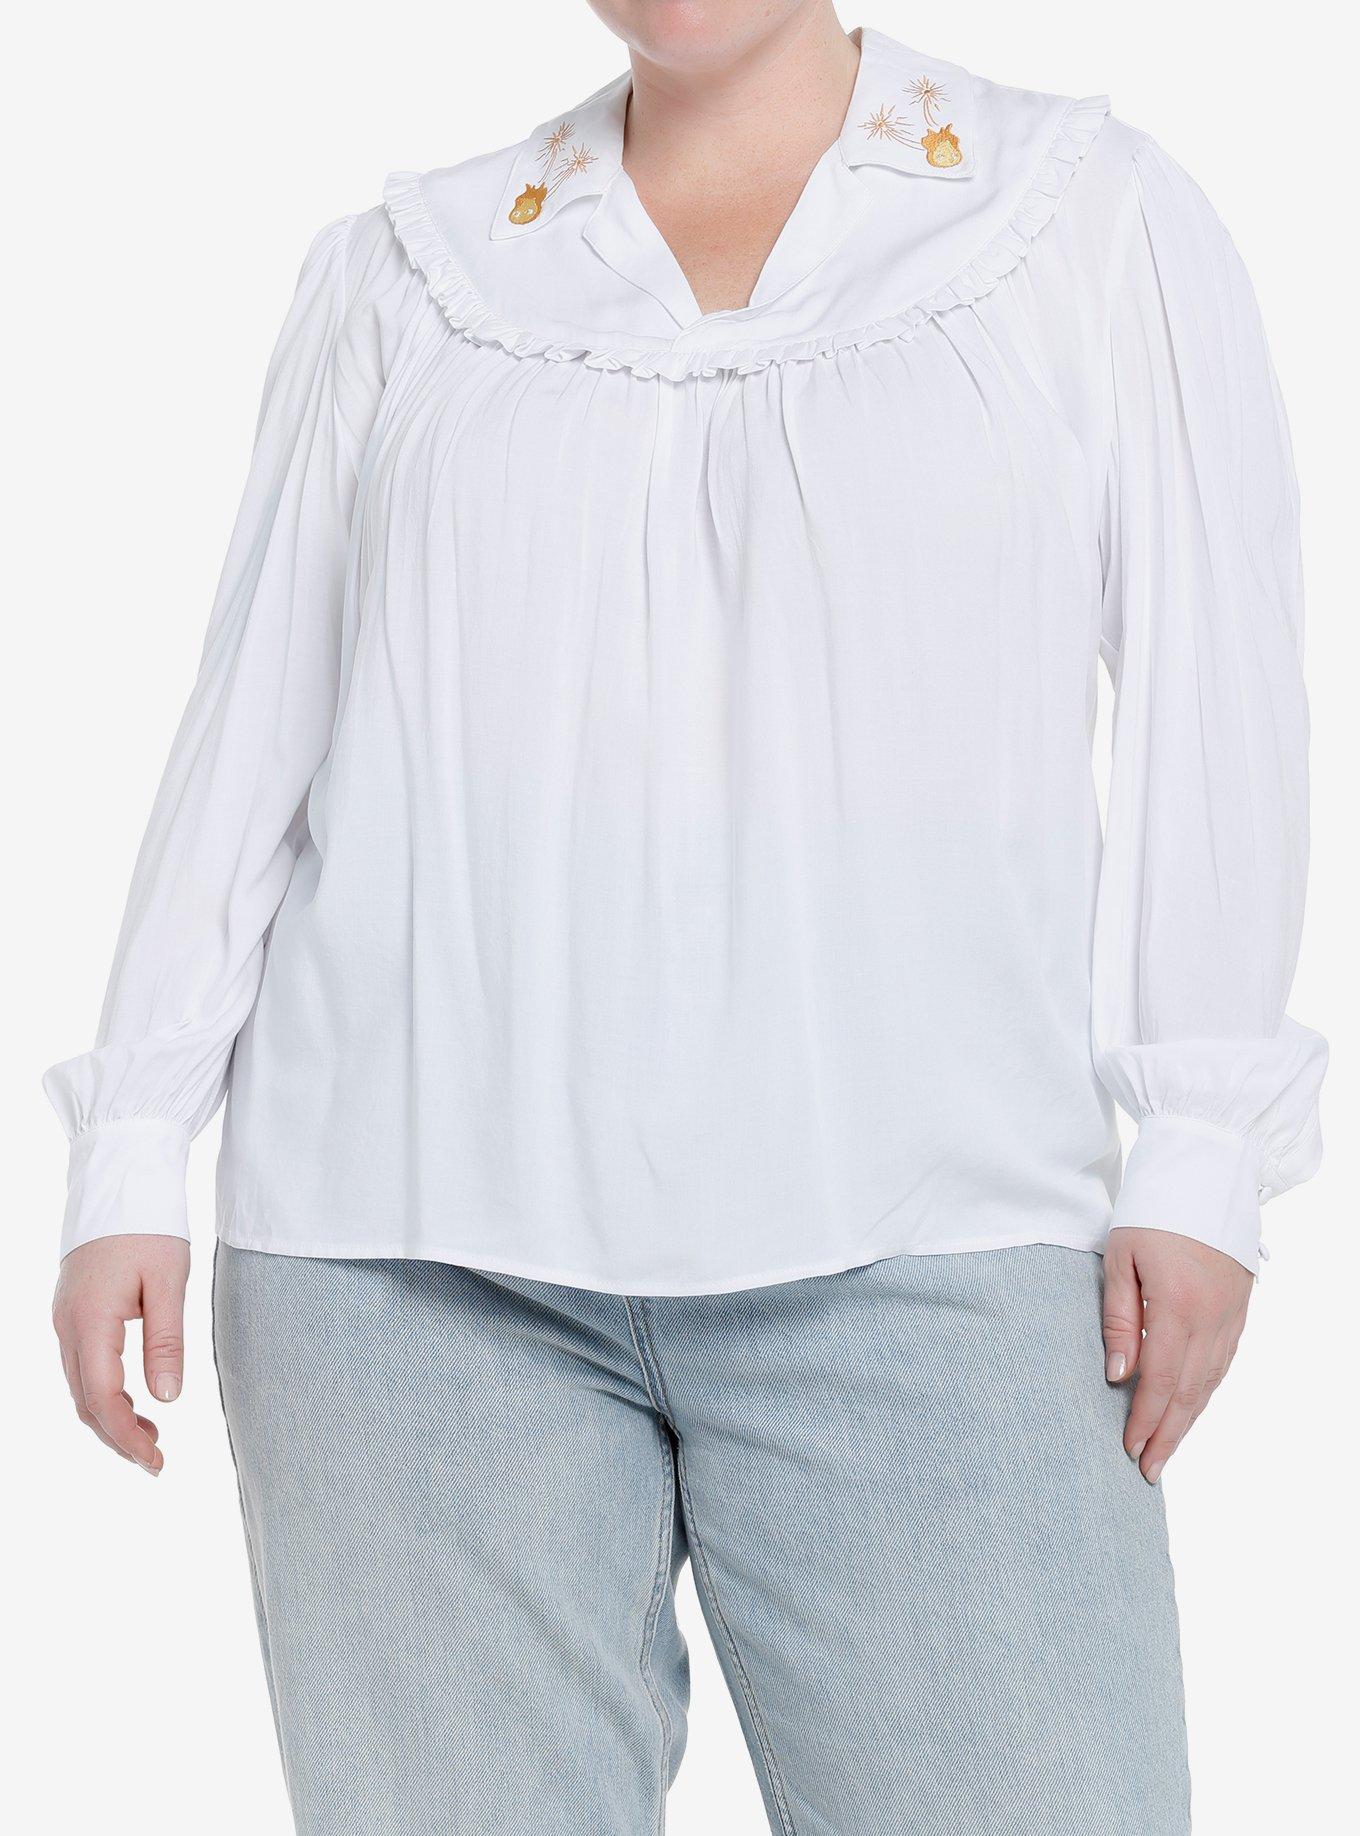 Studio Ghibli Howl's Moving Castle Wizard Howl Cosplay Woven Top Plus Size, BRIGHT WHITE, hi-res